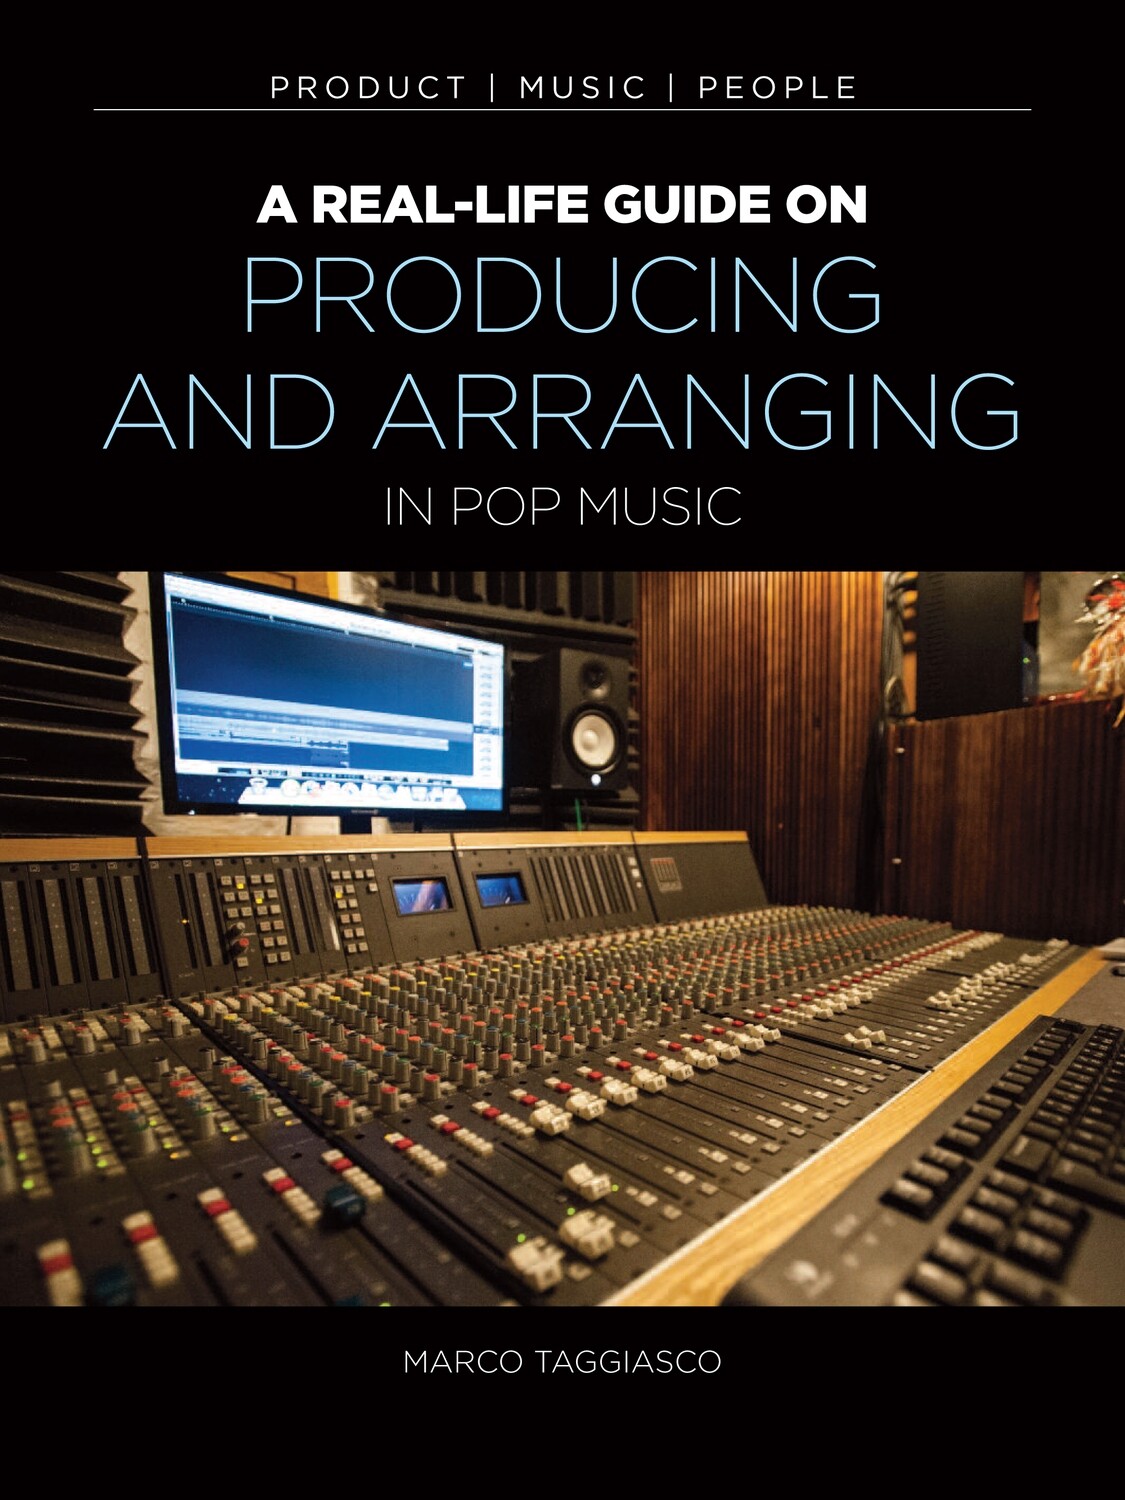 A Real-Life Guide On Arranging and Production